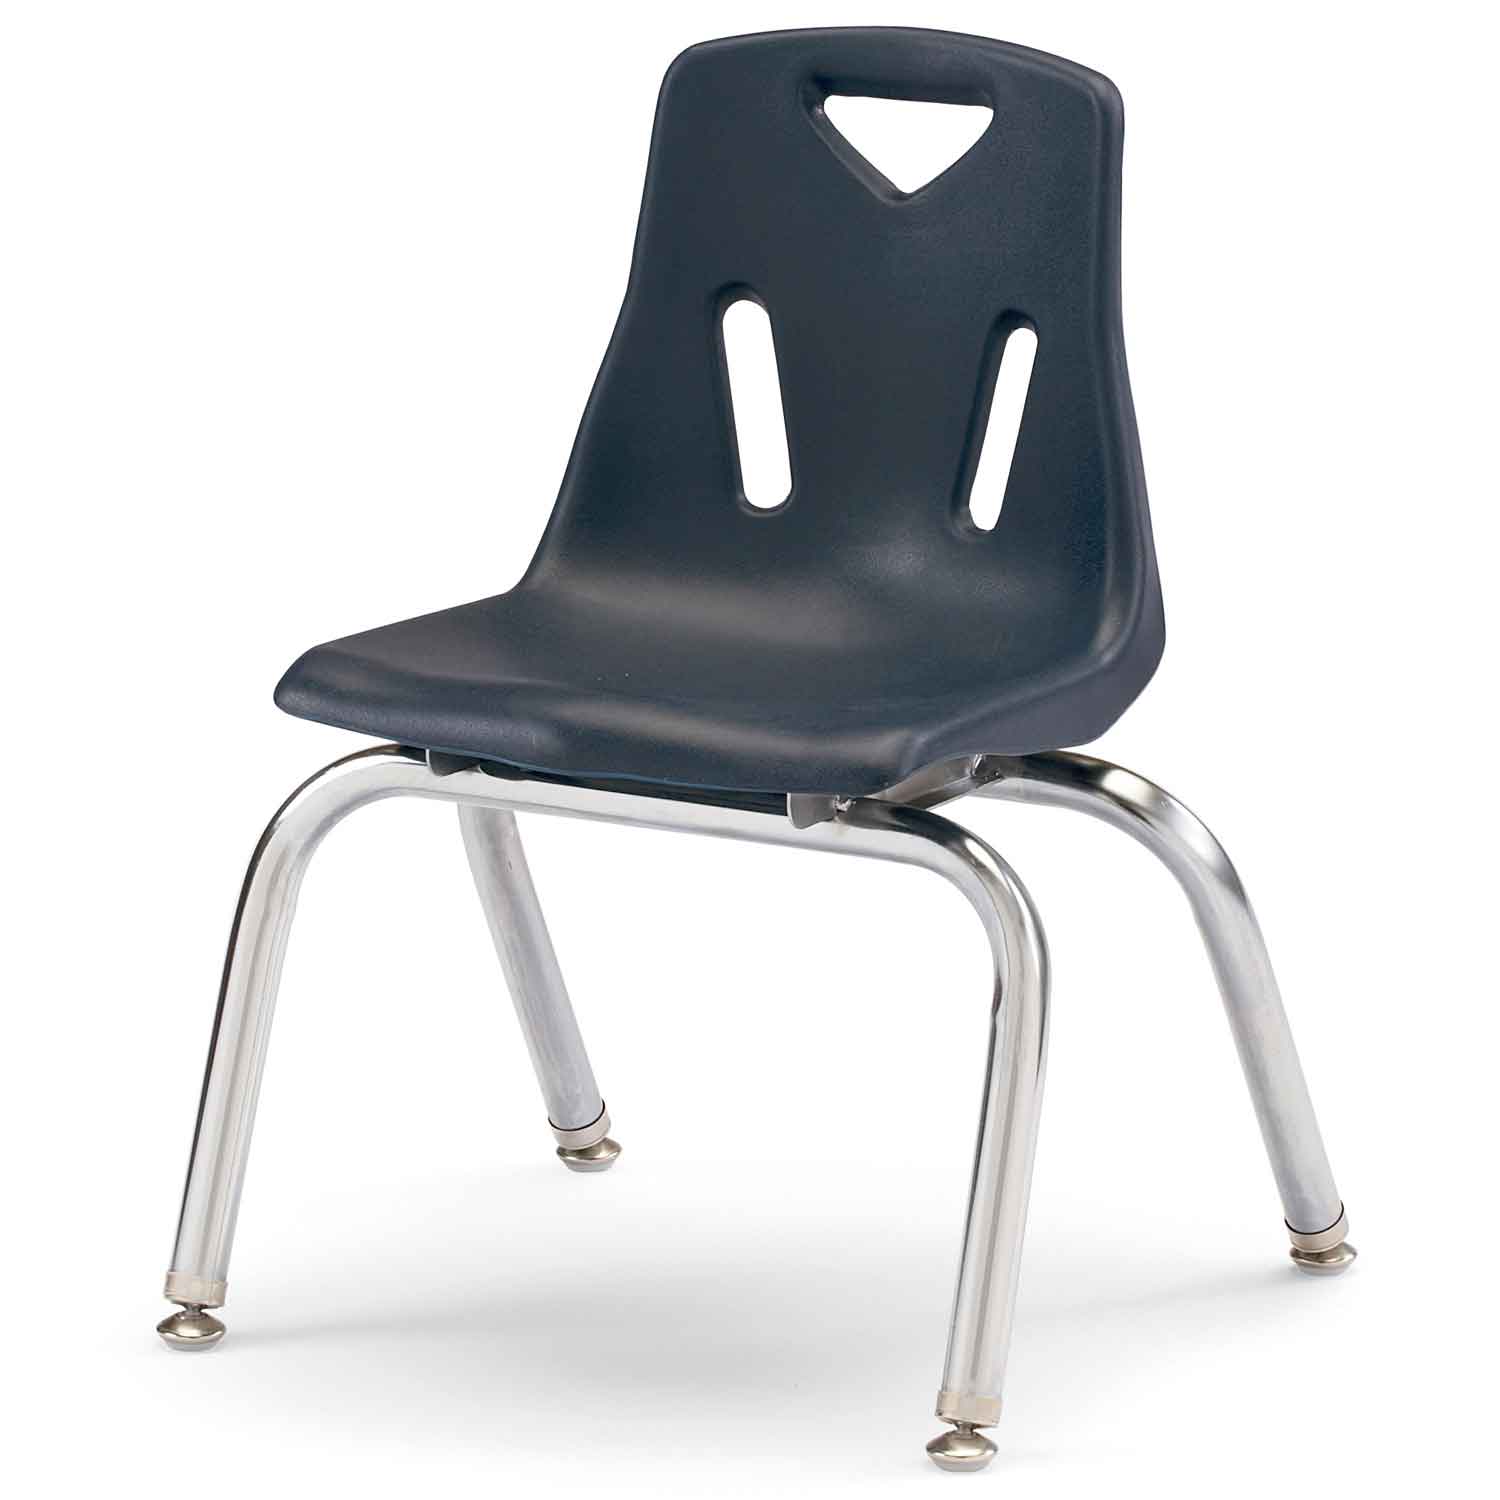 Berries® Plastic Chairs with Chrome Legs, Navy, 12"